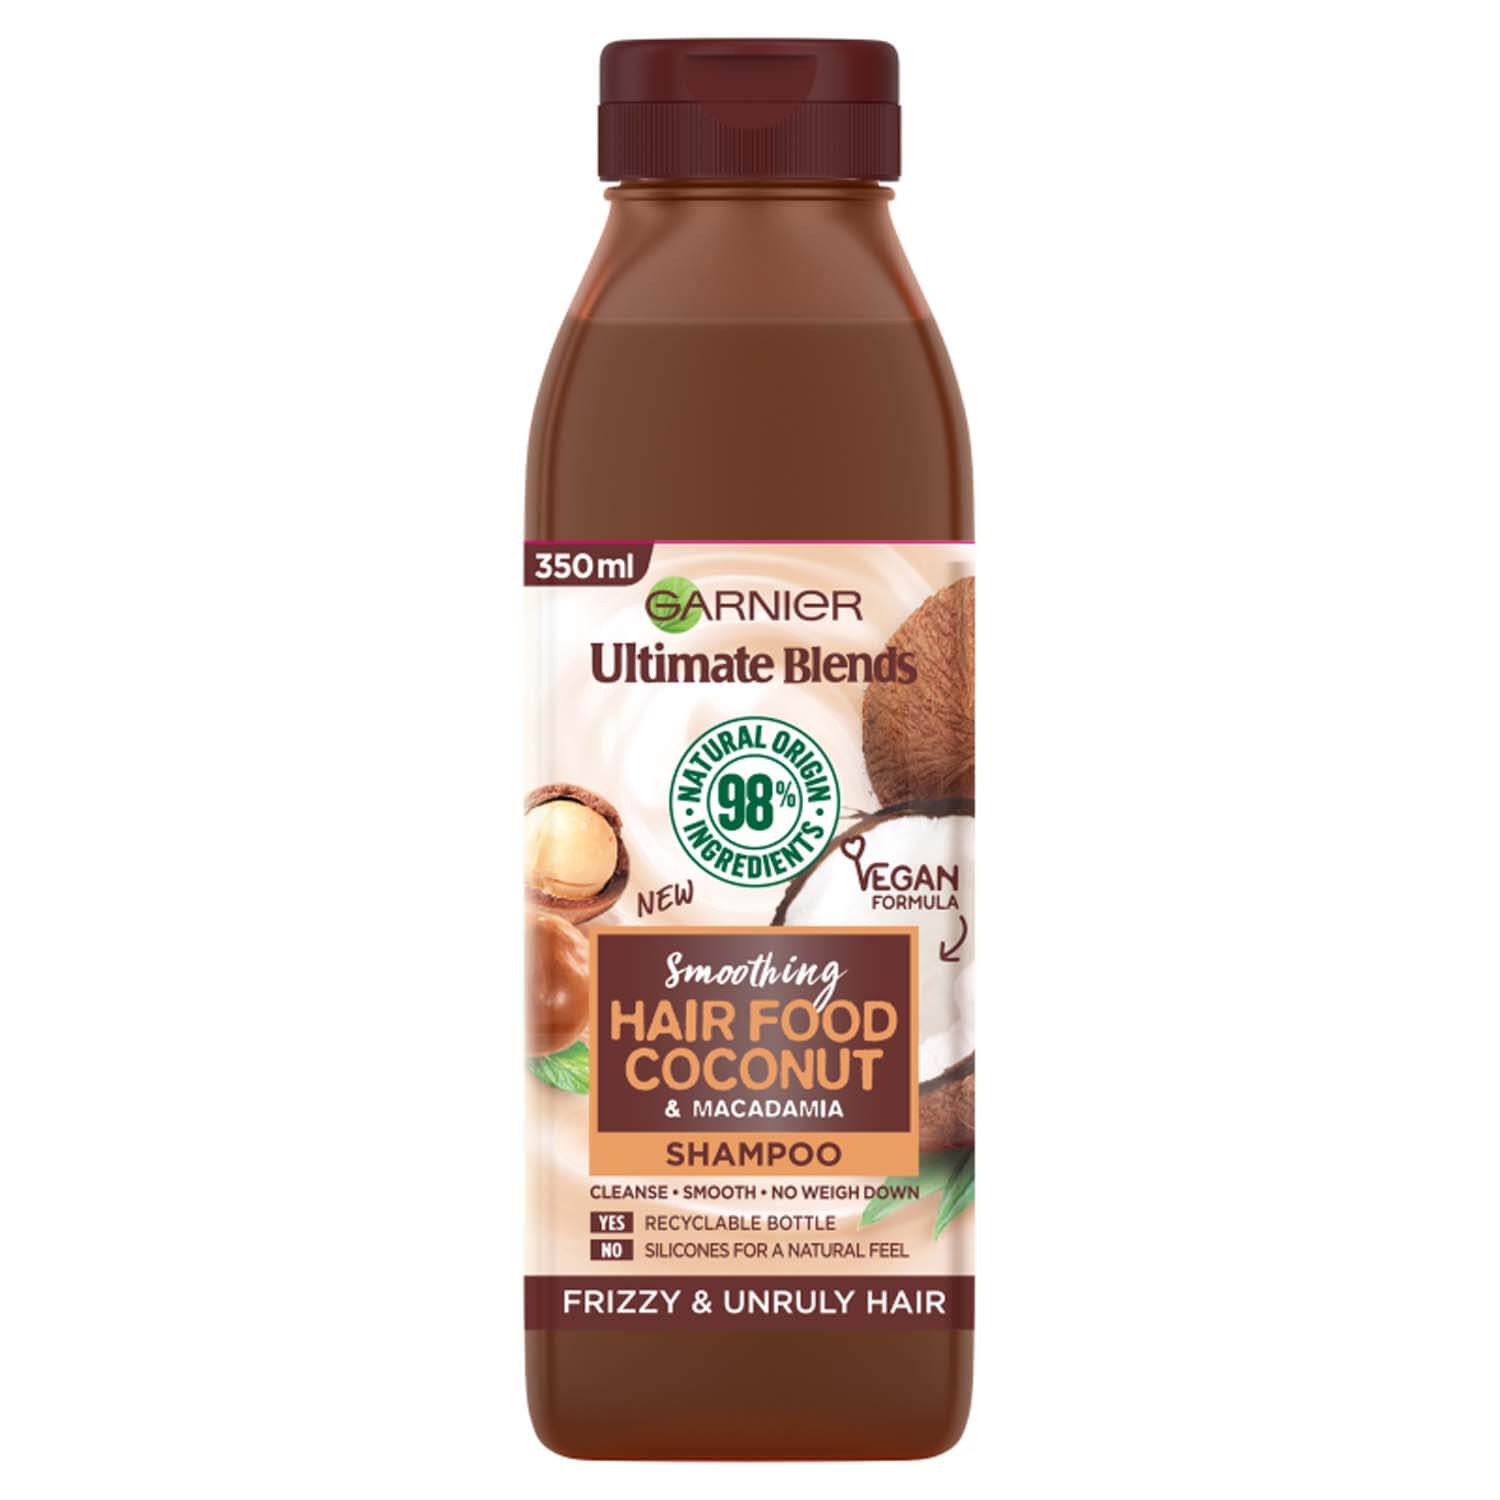 Garnier Ultimate Blends Smoothing Hair Food Coconut Shampoo - 350ml 1 Shaws Department Stores